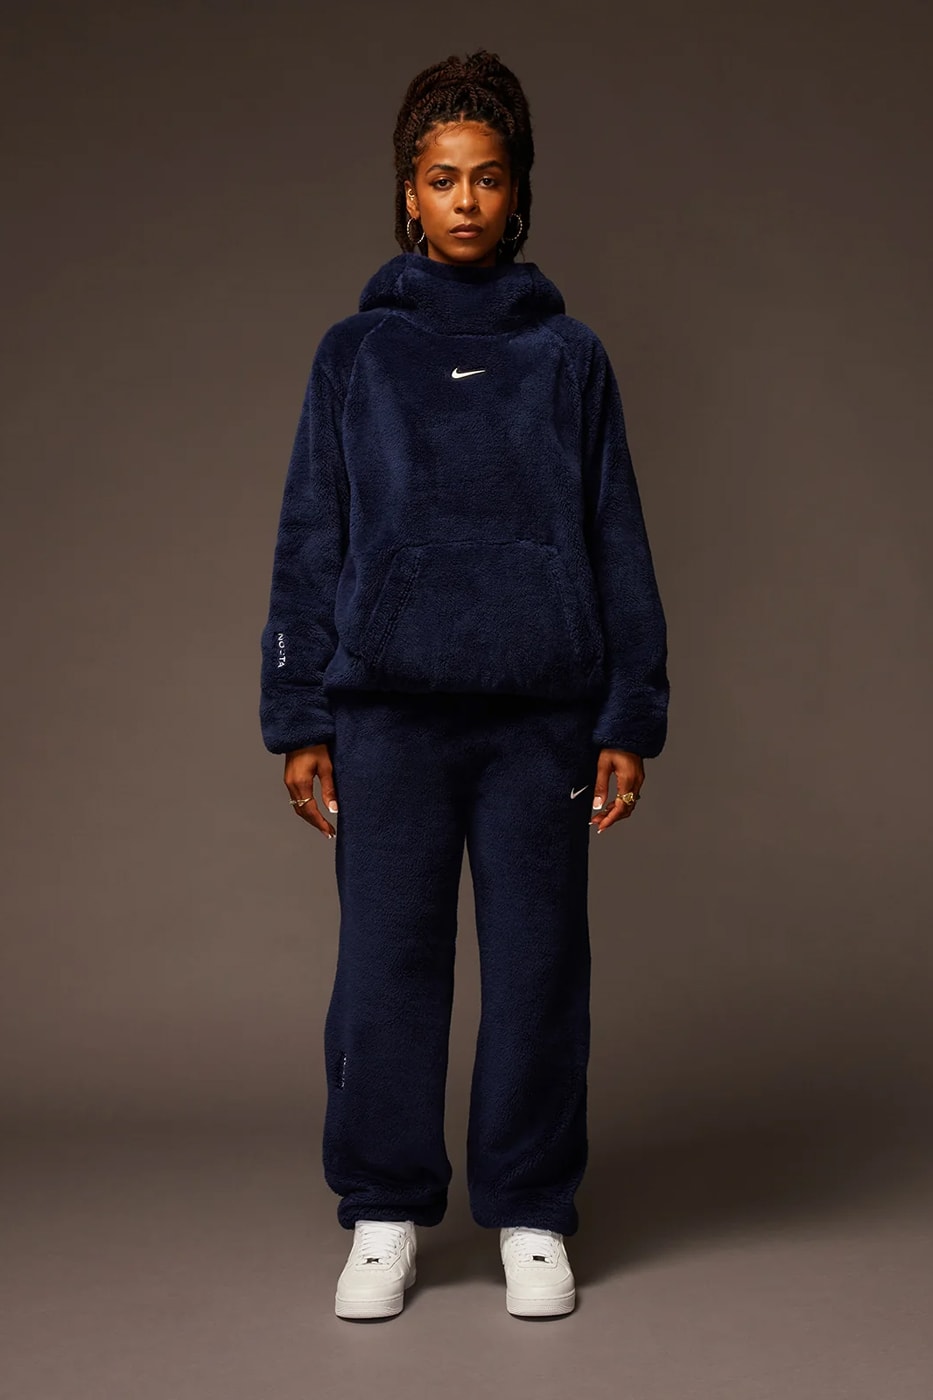 Drake Drops New Nike NOCTA 8K Peaks Apparel Collection normal purja nepalese born world renowned mountaineer 